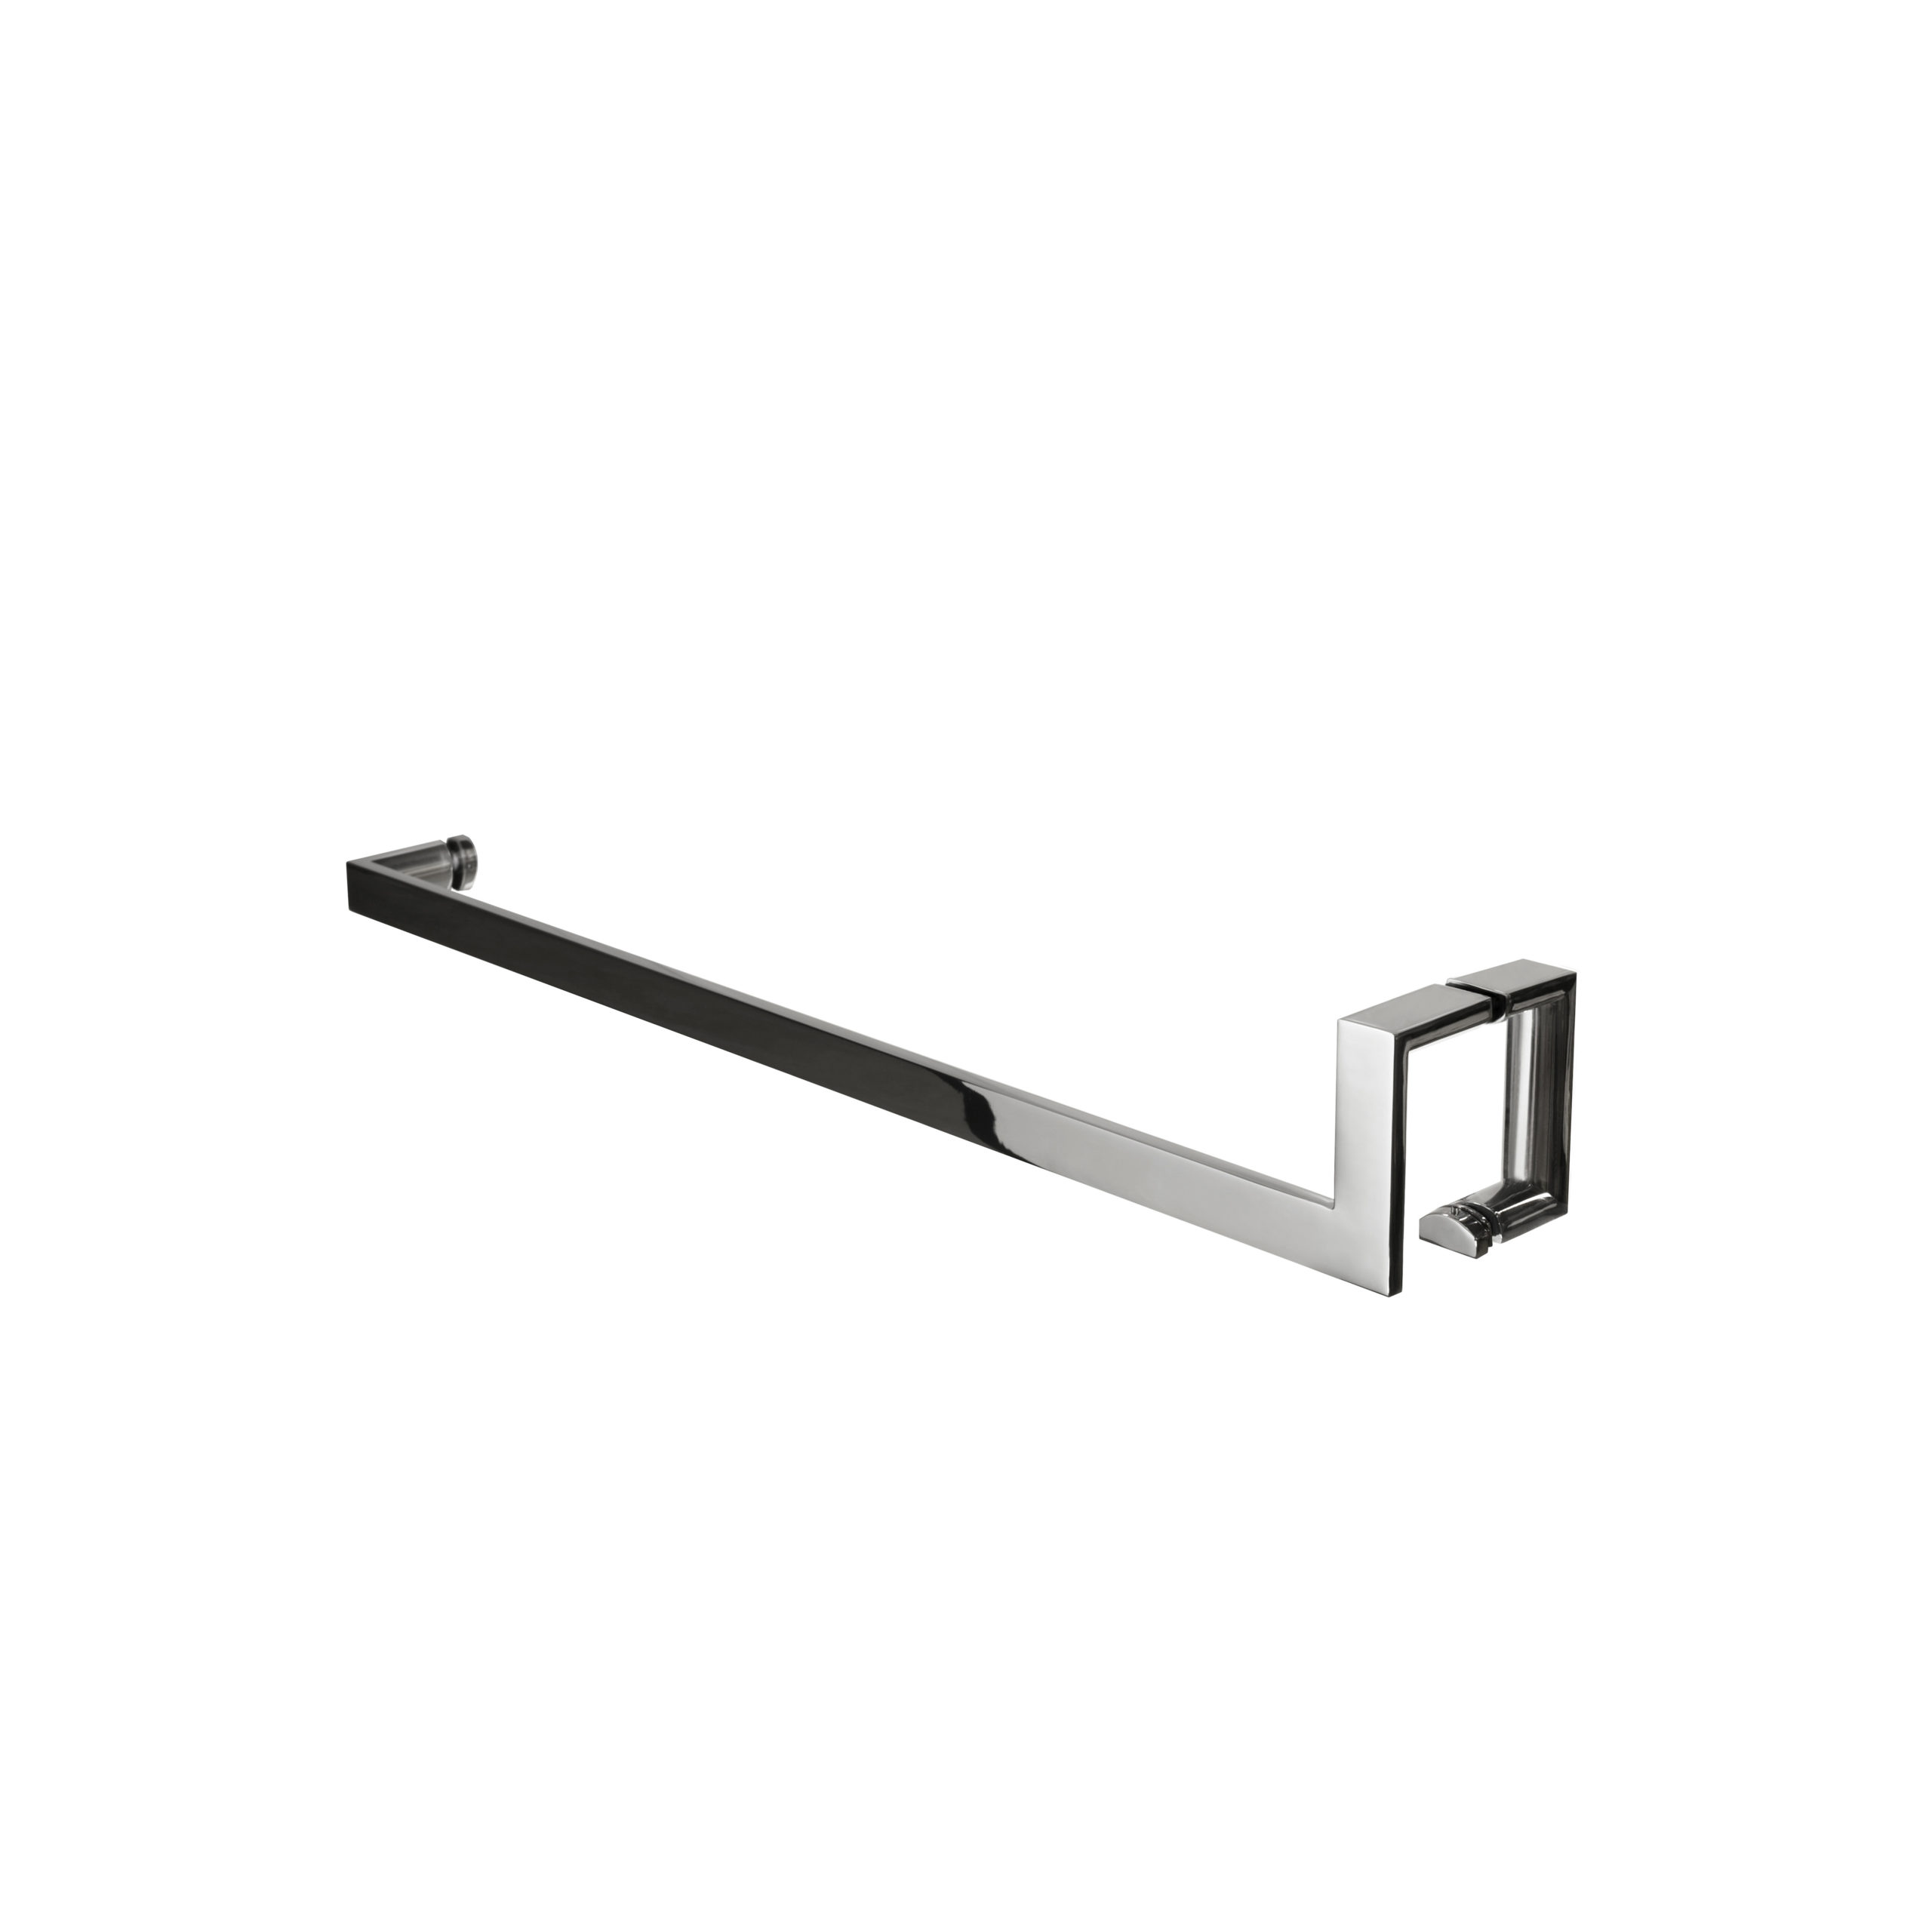 Polished stainless steel modern door handle and d pull - towel bar - product featured image - 24 inch length - product SKU LU 402-4 PSS